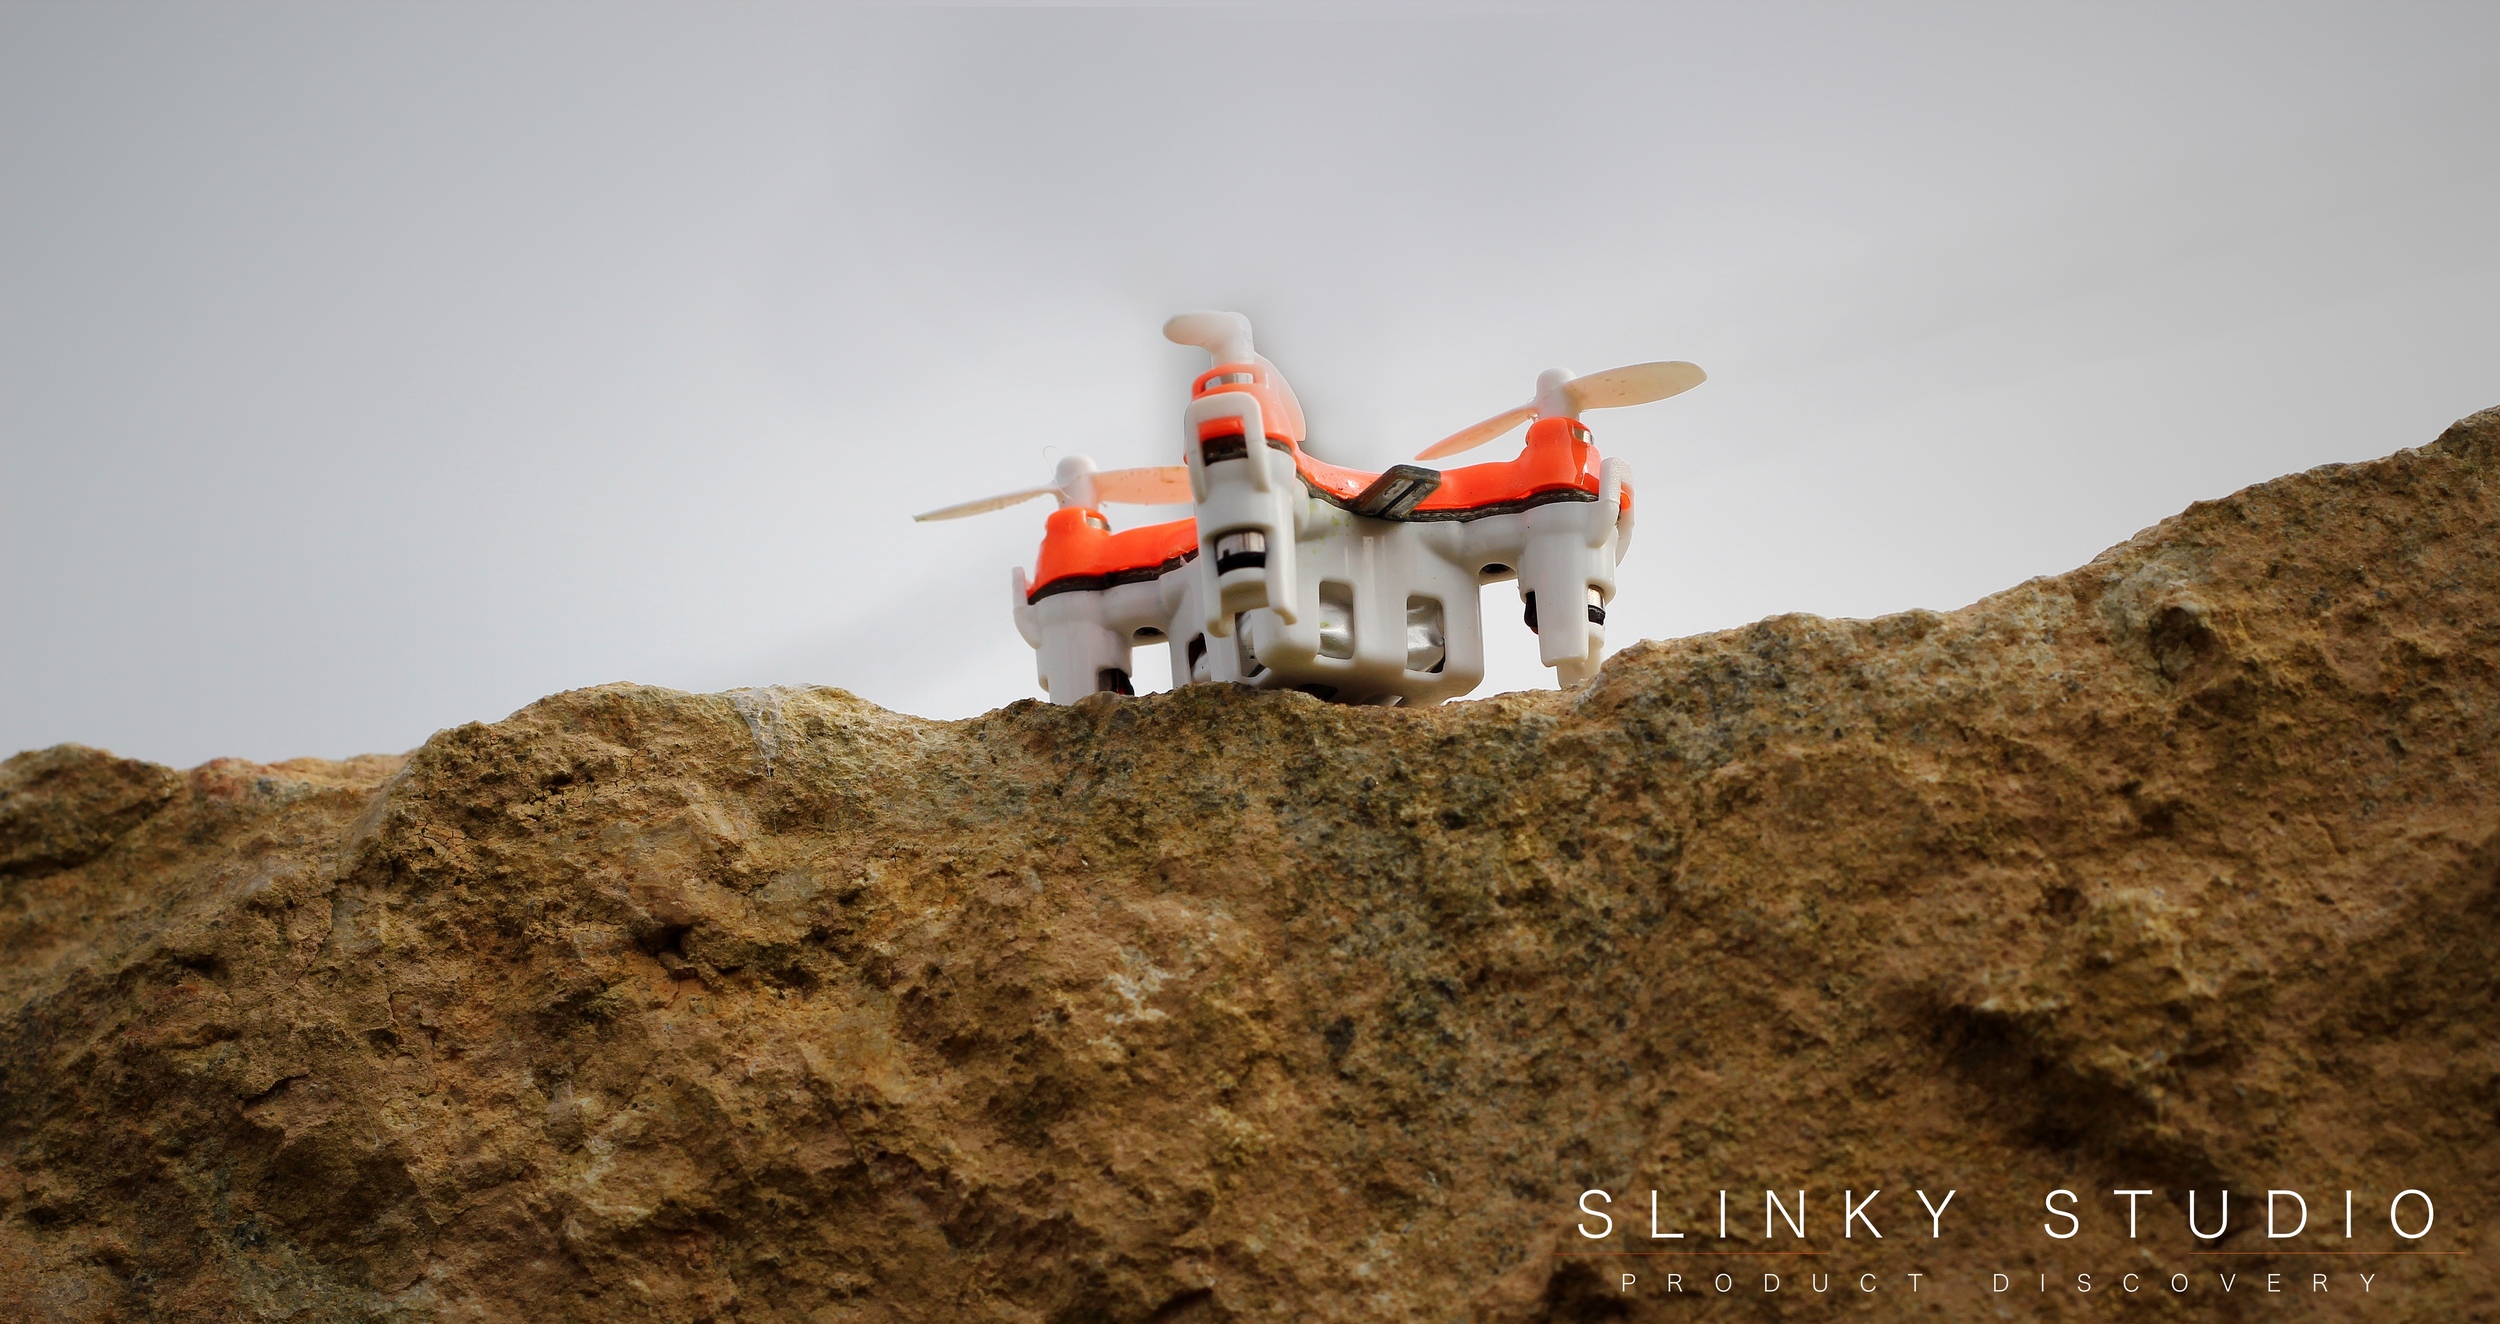 BuzzBee Nano Drone Holding Landed on Rock Looking up at sky.jpg